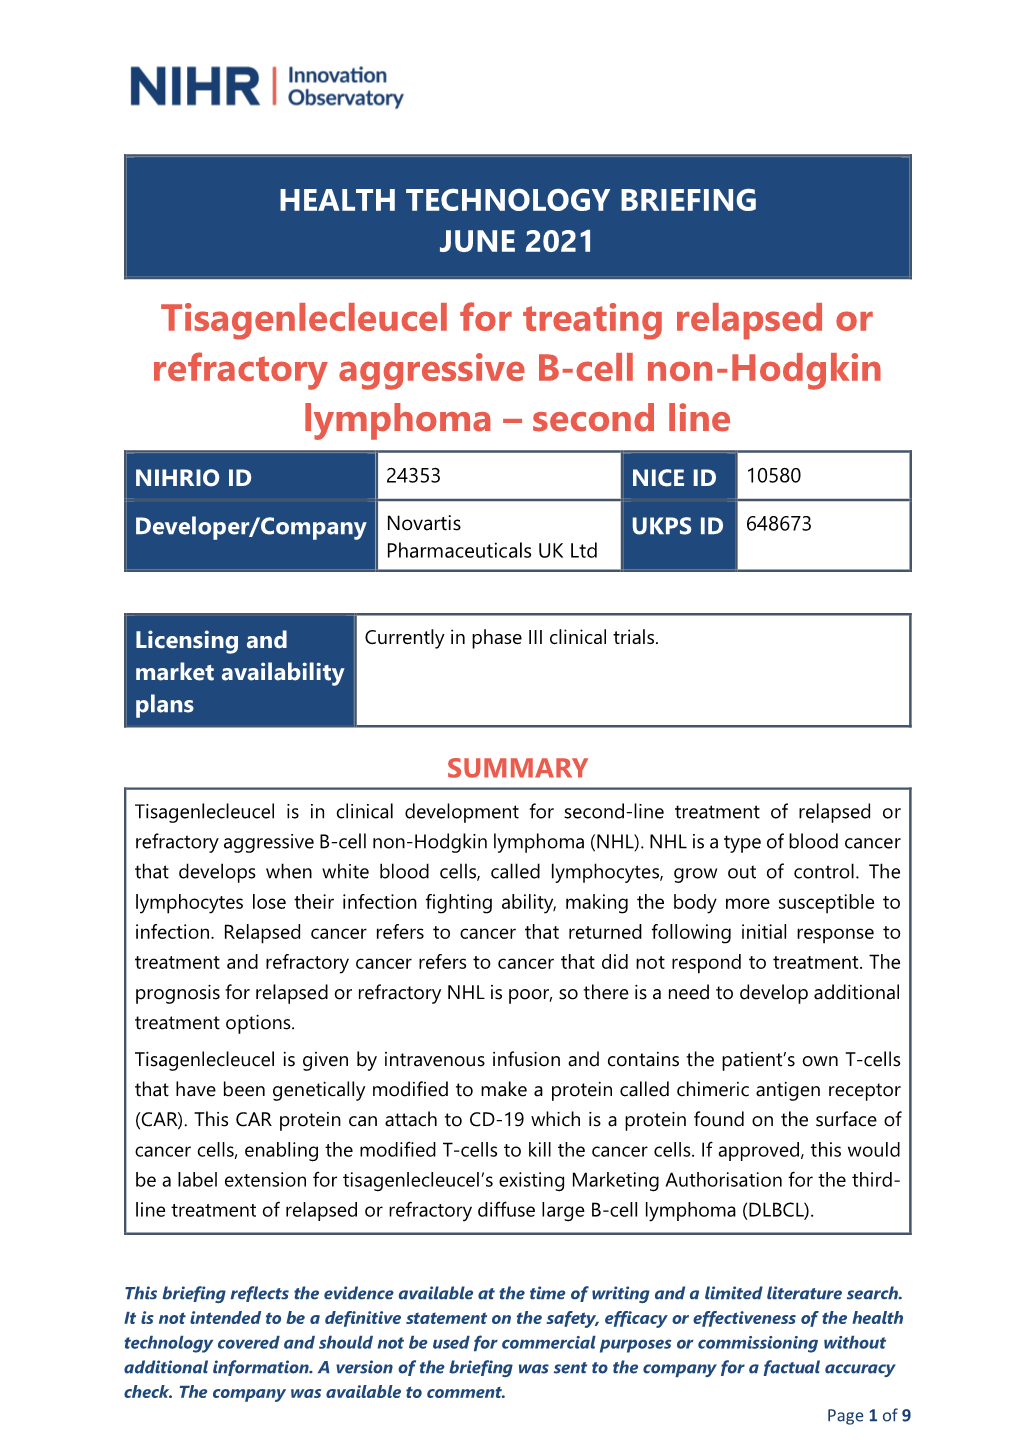 Tisagenlecleucel for Treating Relapsed Or Refractory Aggressive B-Cell Non-Hodgkin Lymphoma – Second Line